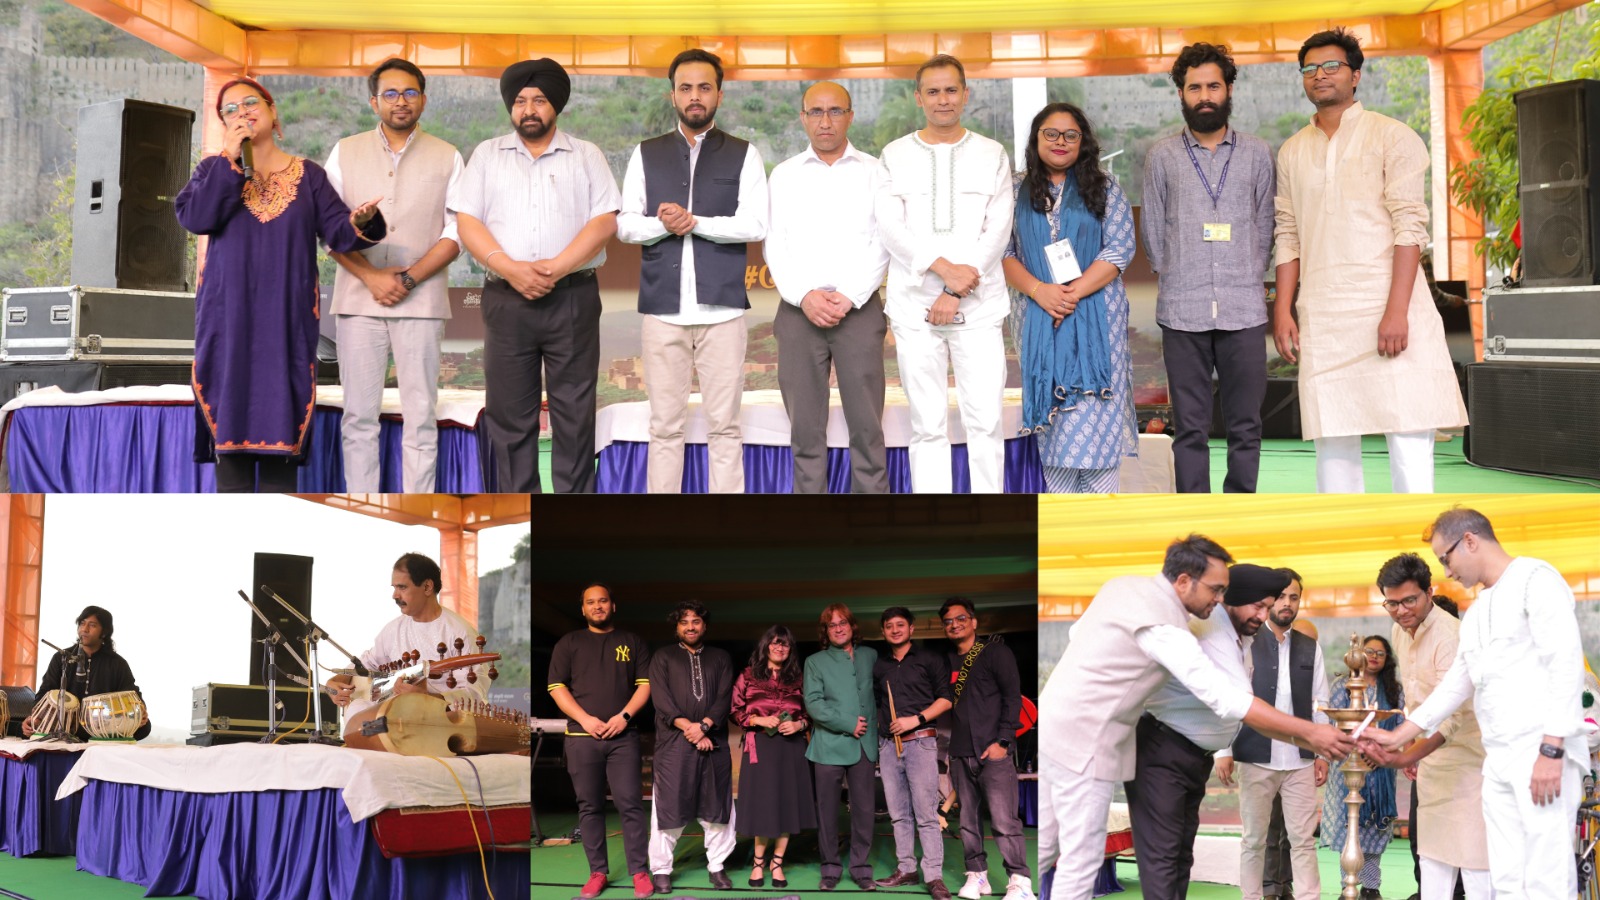 Ministry of Culture, Government of India and Swar Dharohar Foundation is celebrating the Amrit Mahotsav of 75th Independence Day in five states of the country